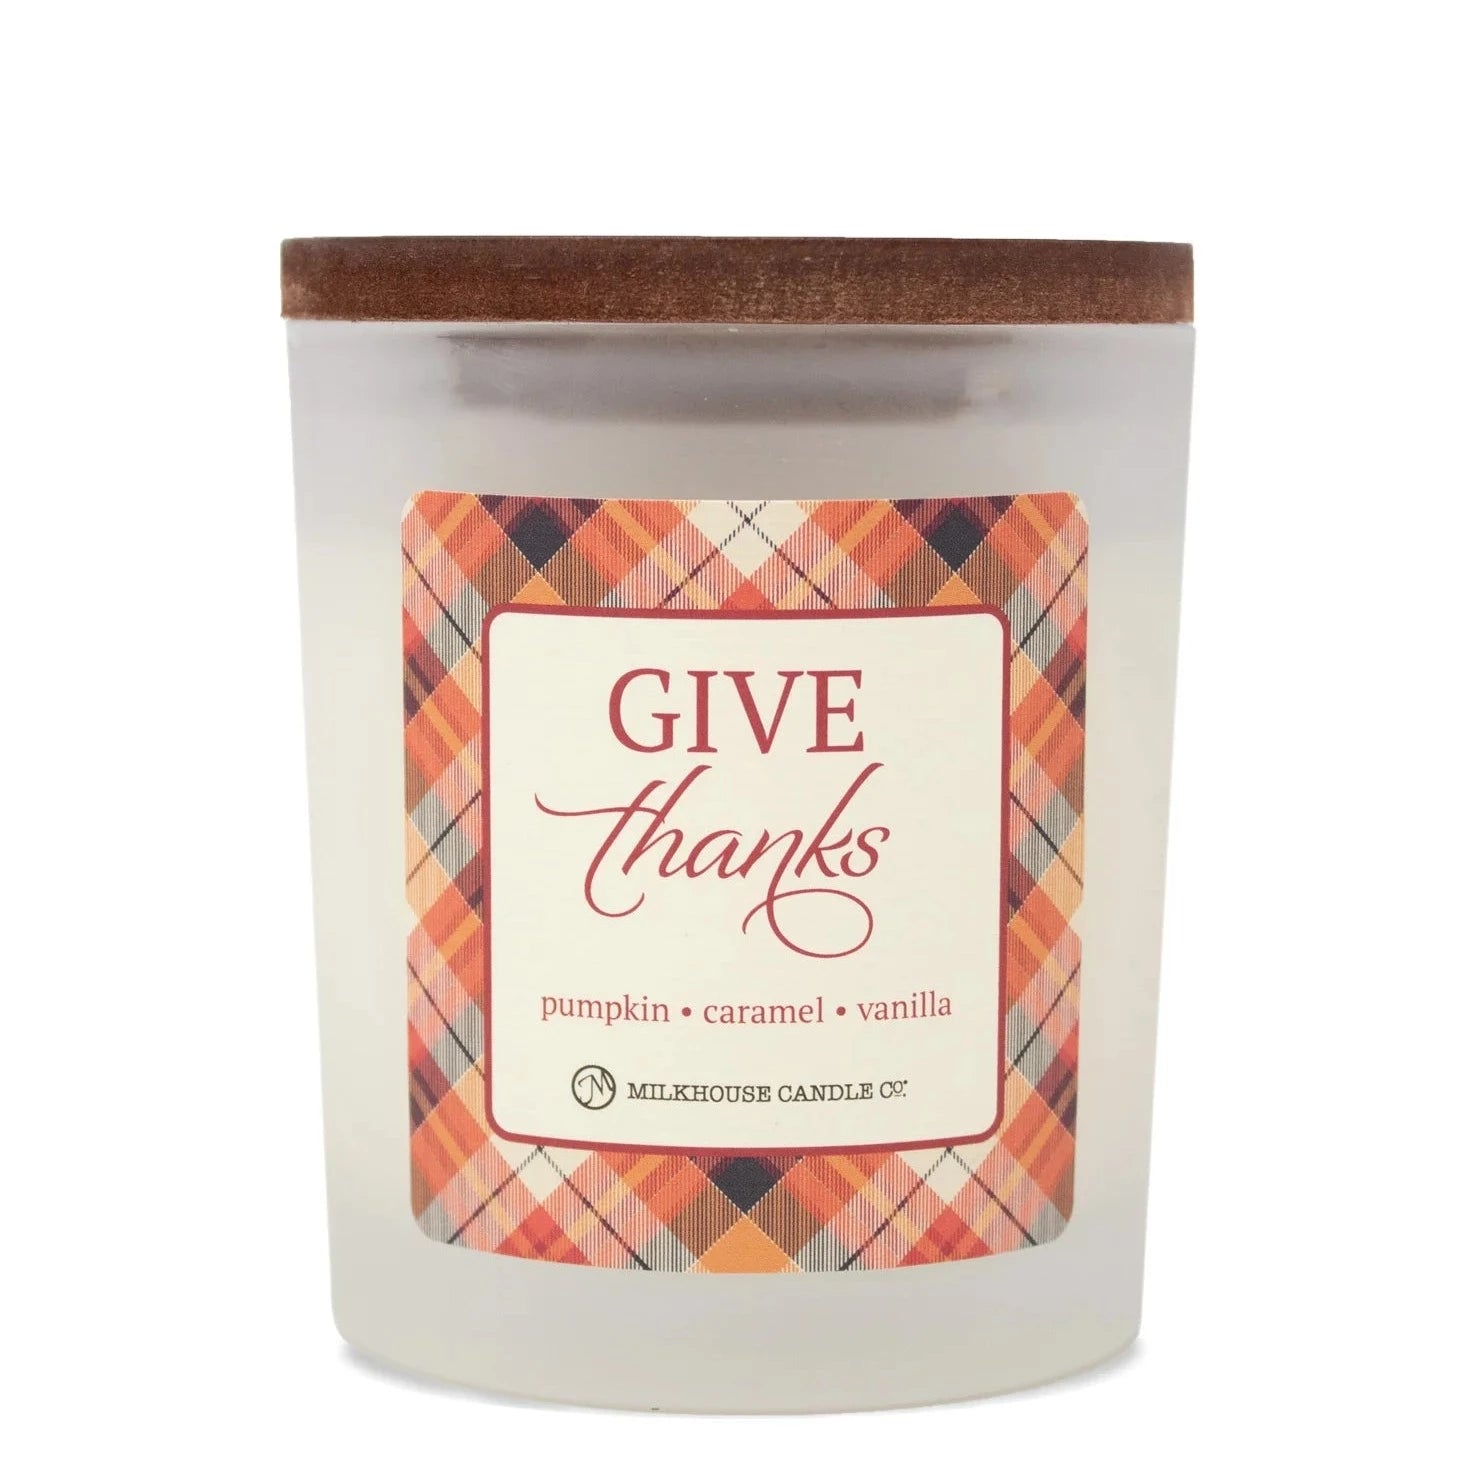 Give Thanks 6.5oz Limited Edition Candle by Milkhouse Candle Co.